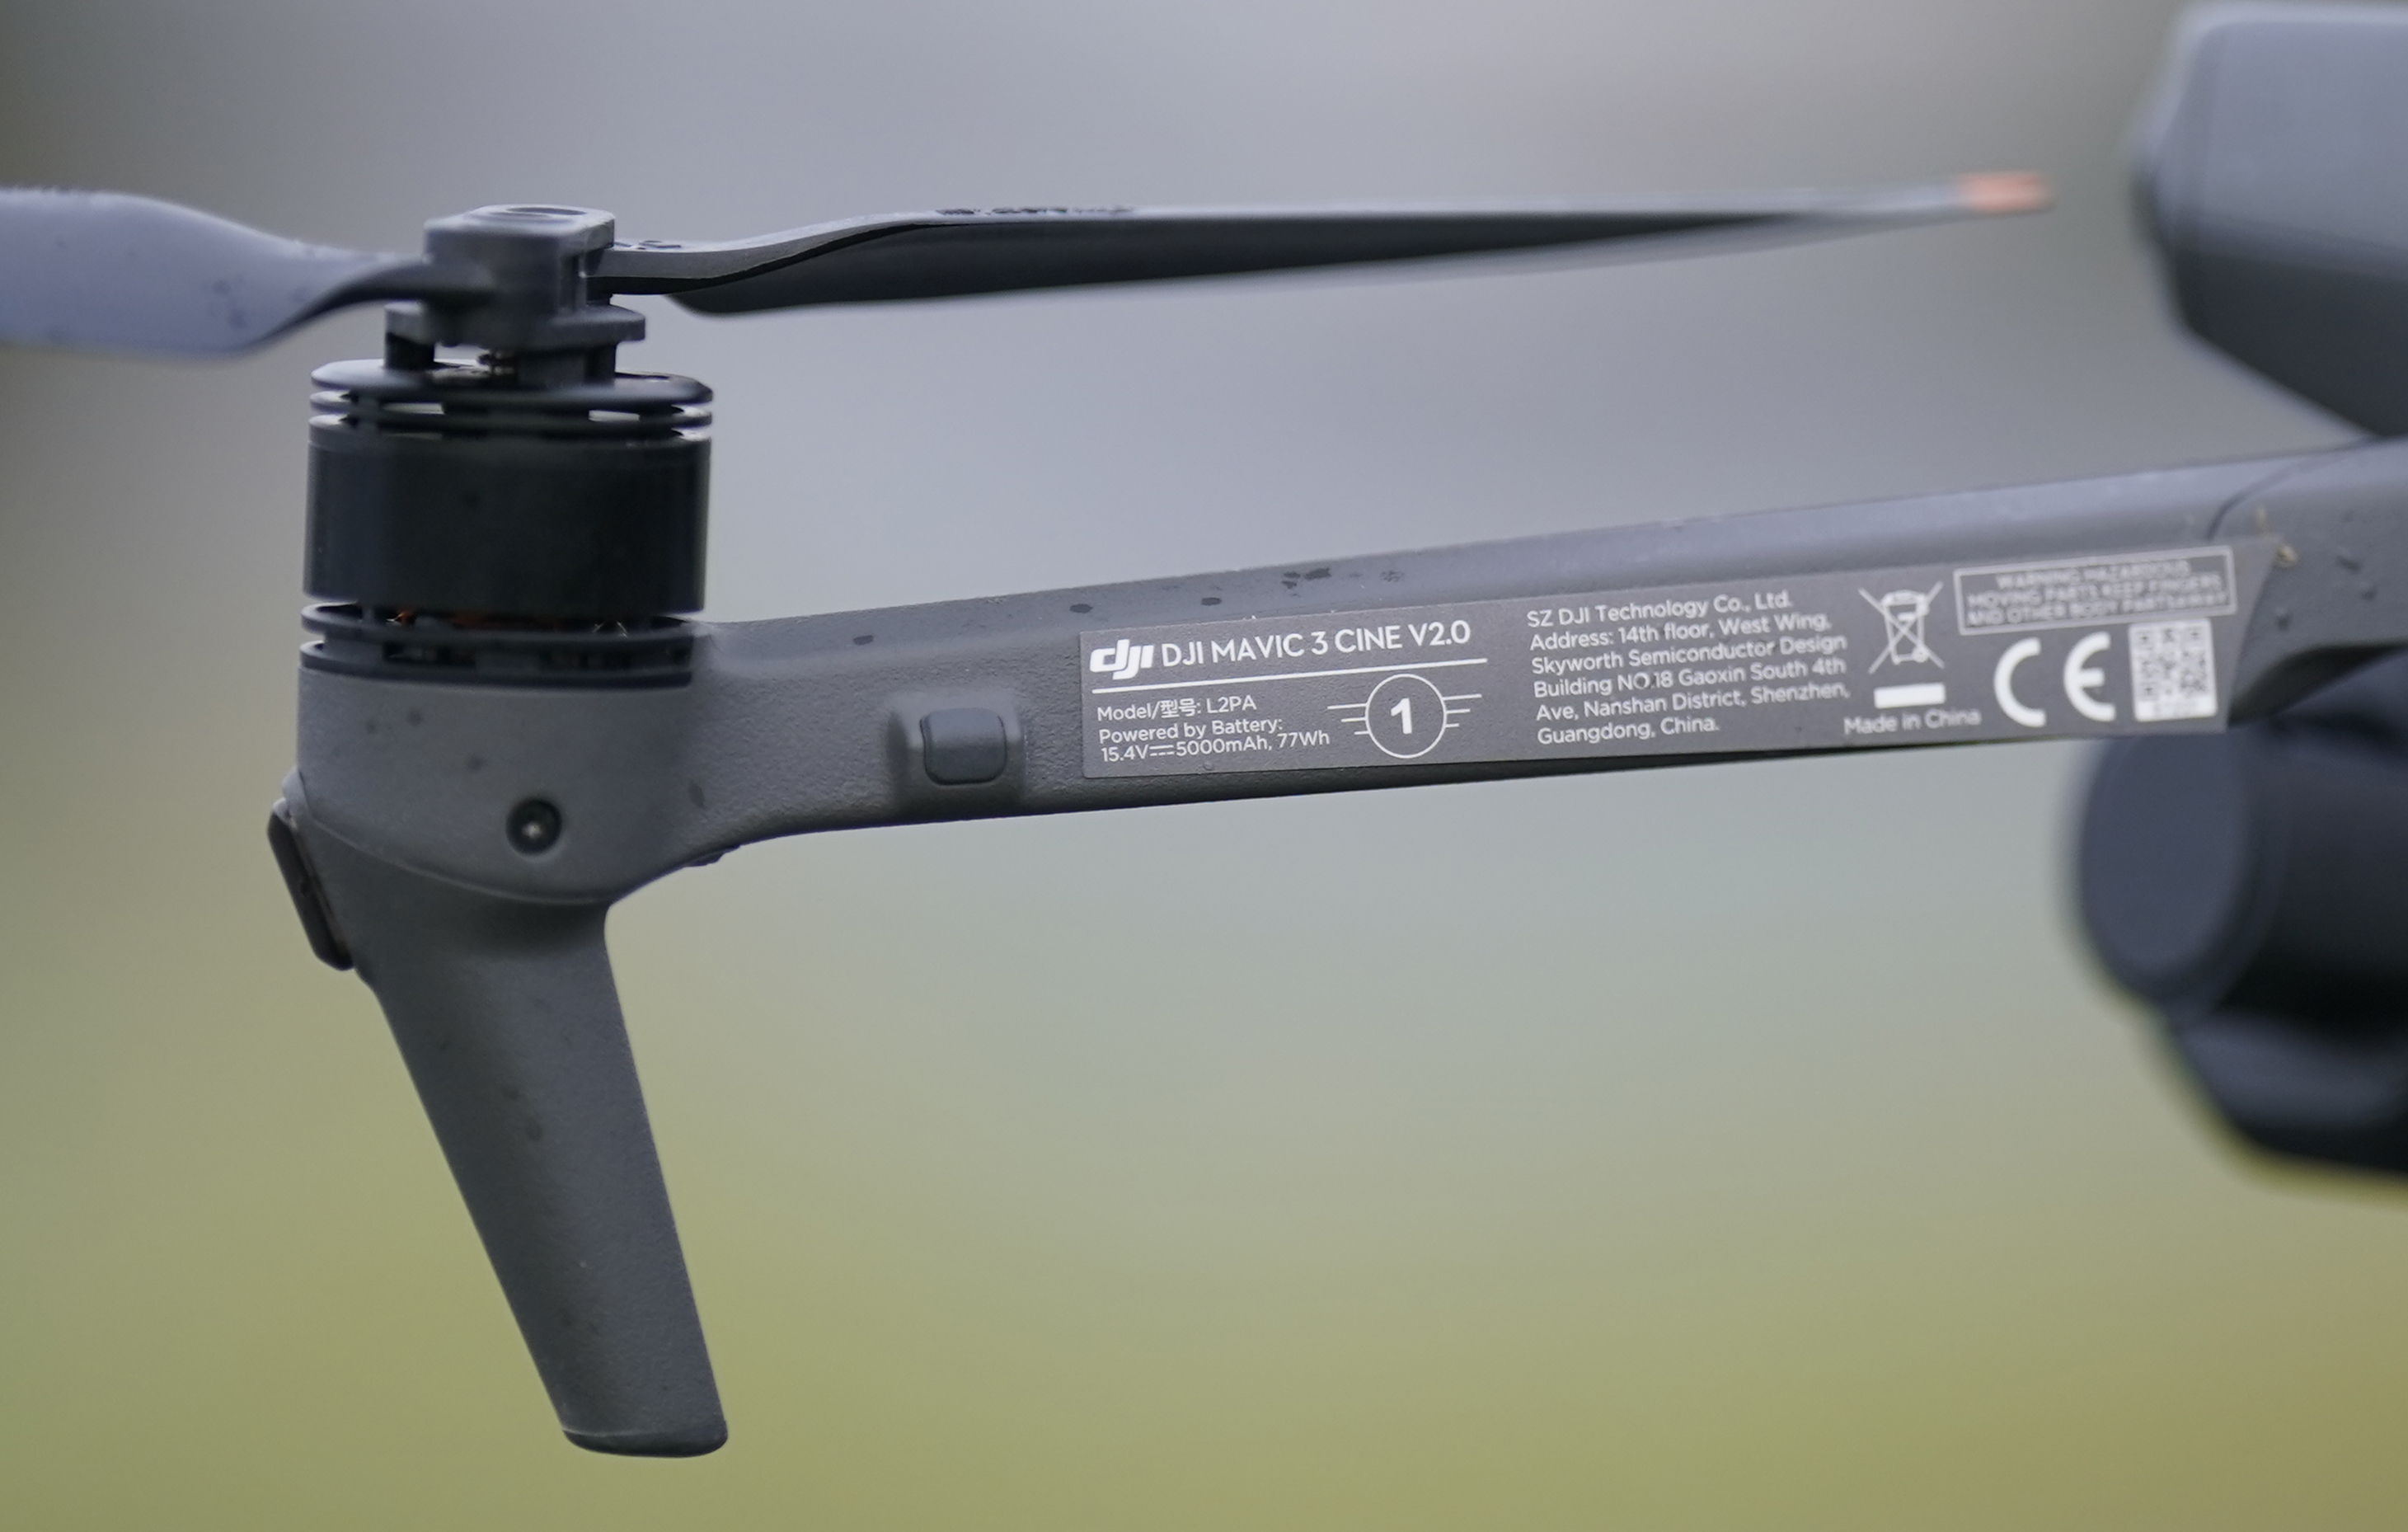 A drone with the new C1 classification marking 